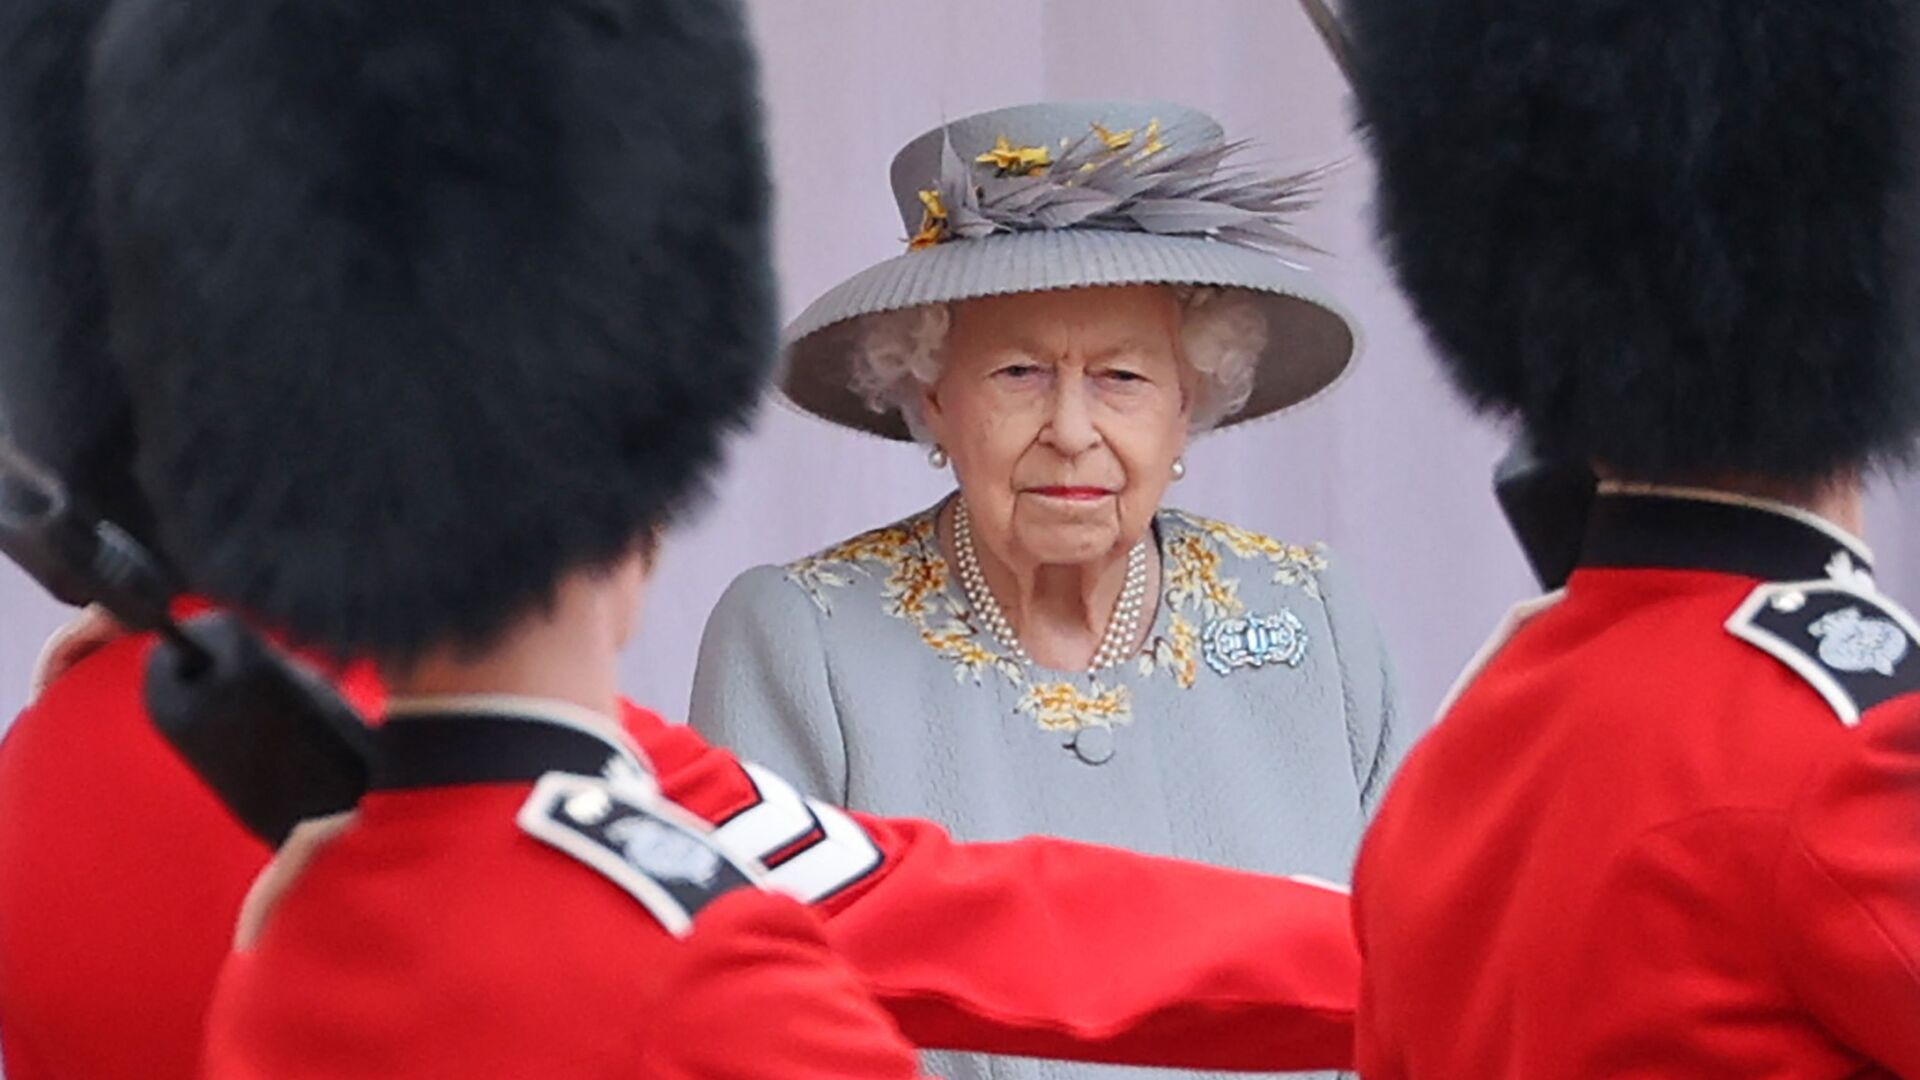 Britain's Queen Elizabeth II watches a military ceremony to mark her official birthday at Windsor Castle on June 12, 2021 in Windsor. - Sputnik International, 1920, 01.10.2021